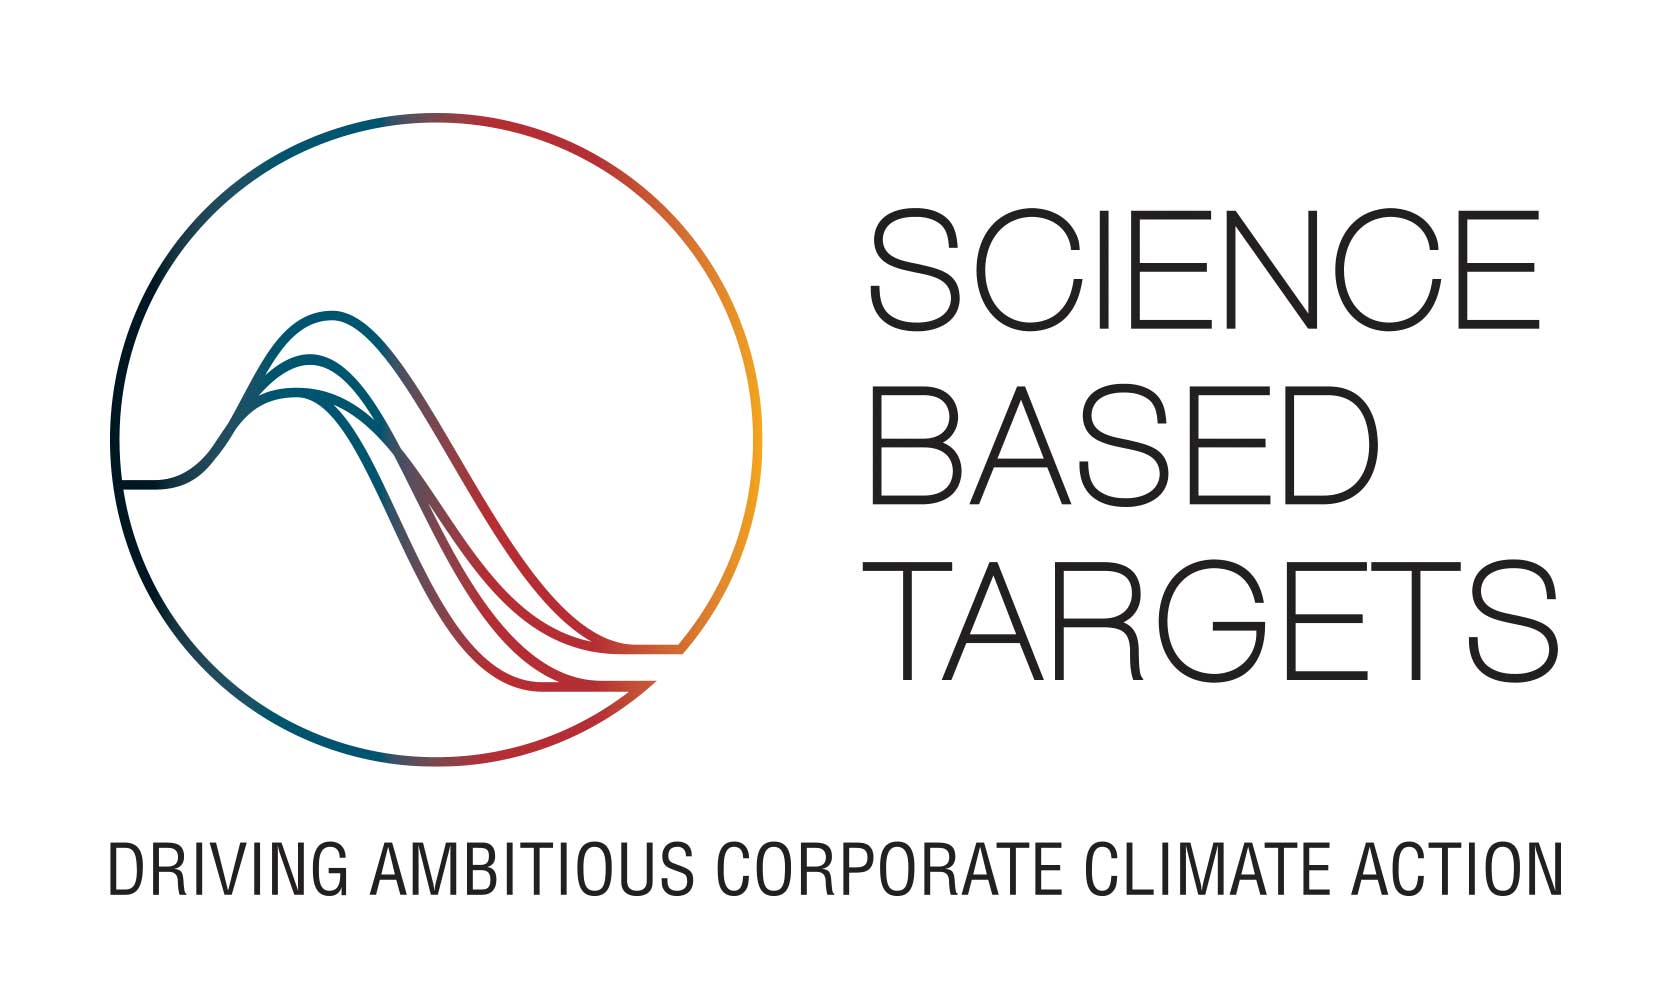 The Science Based Targets logo